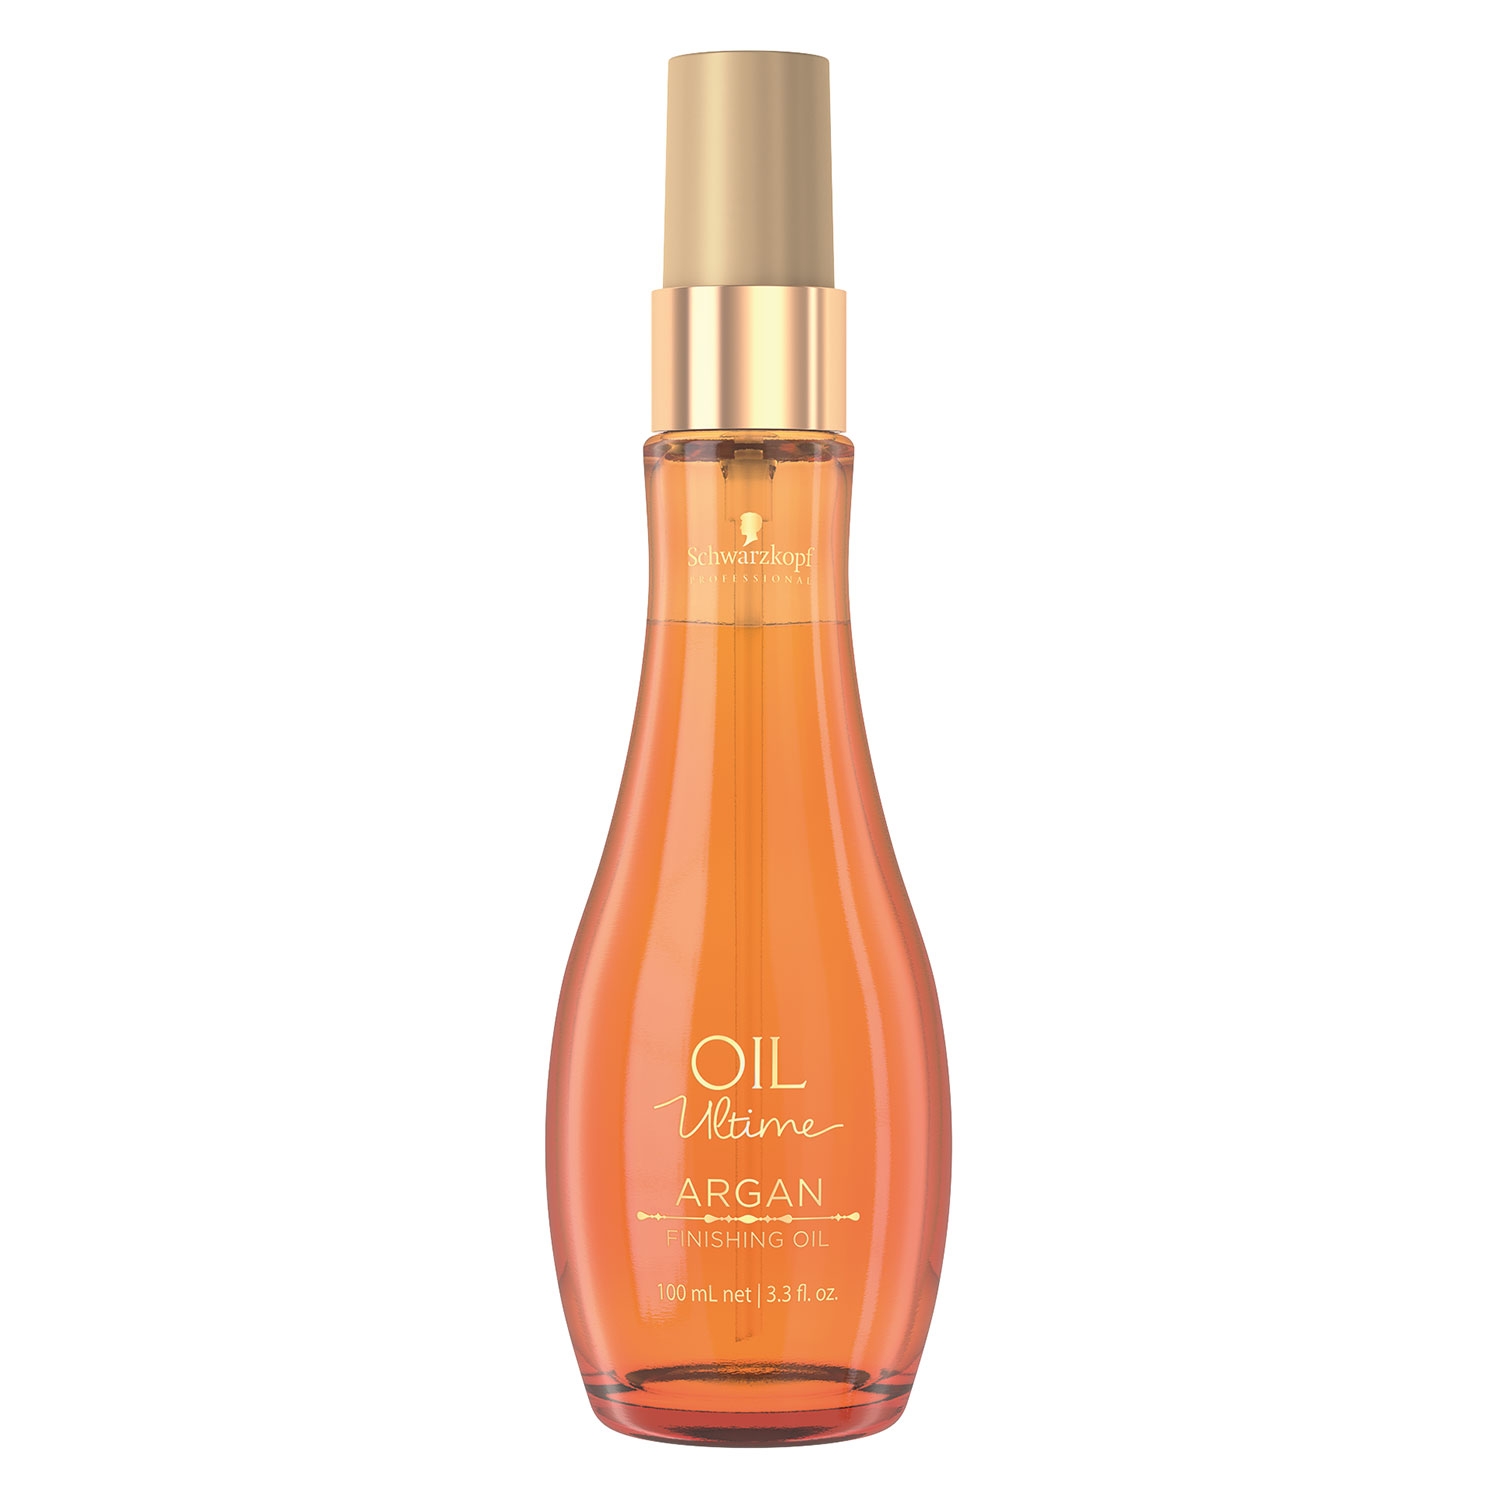 Product image from Oil Ultime - Argan Finishing Oil